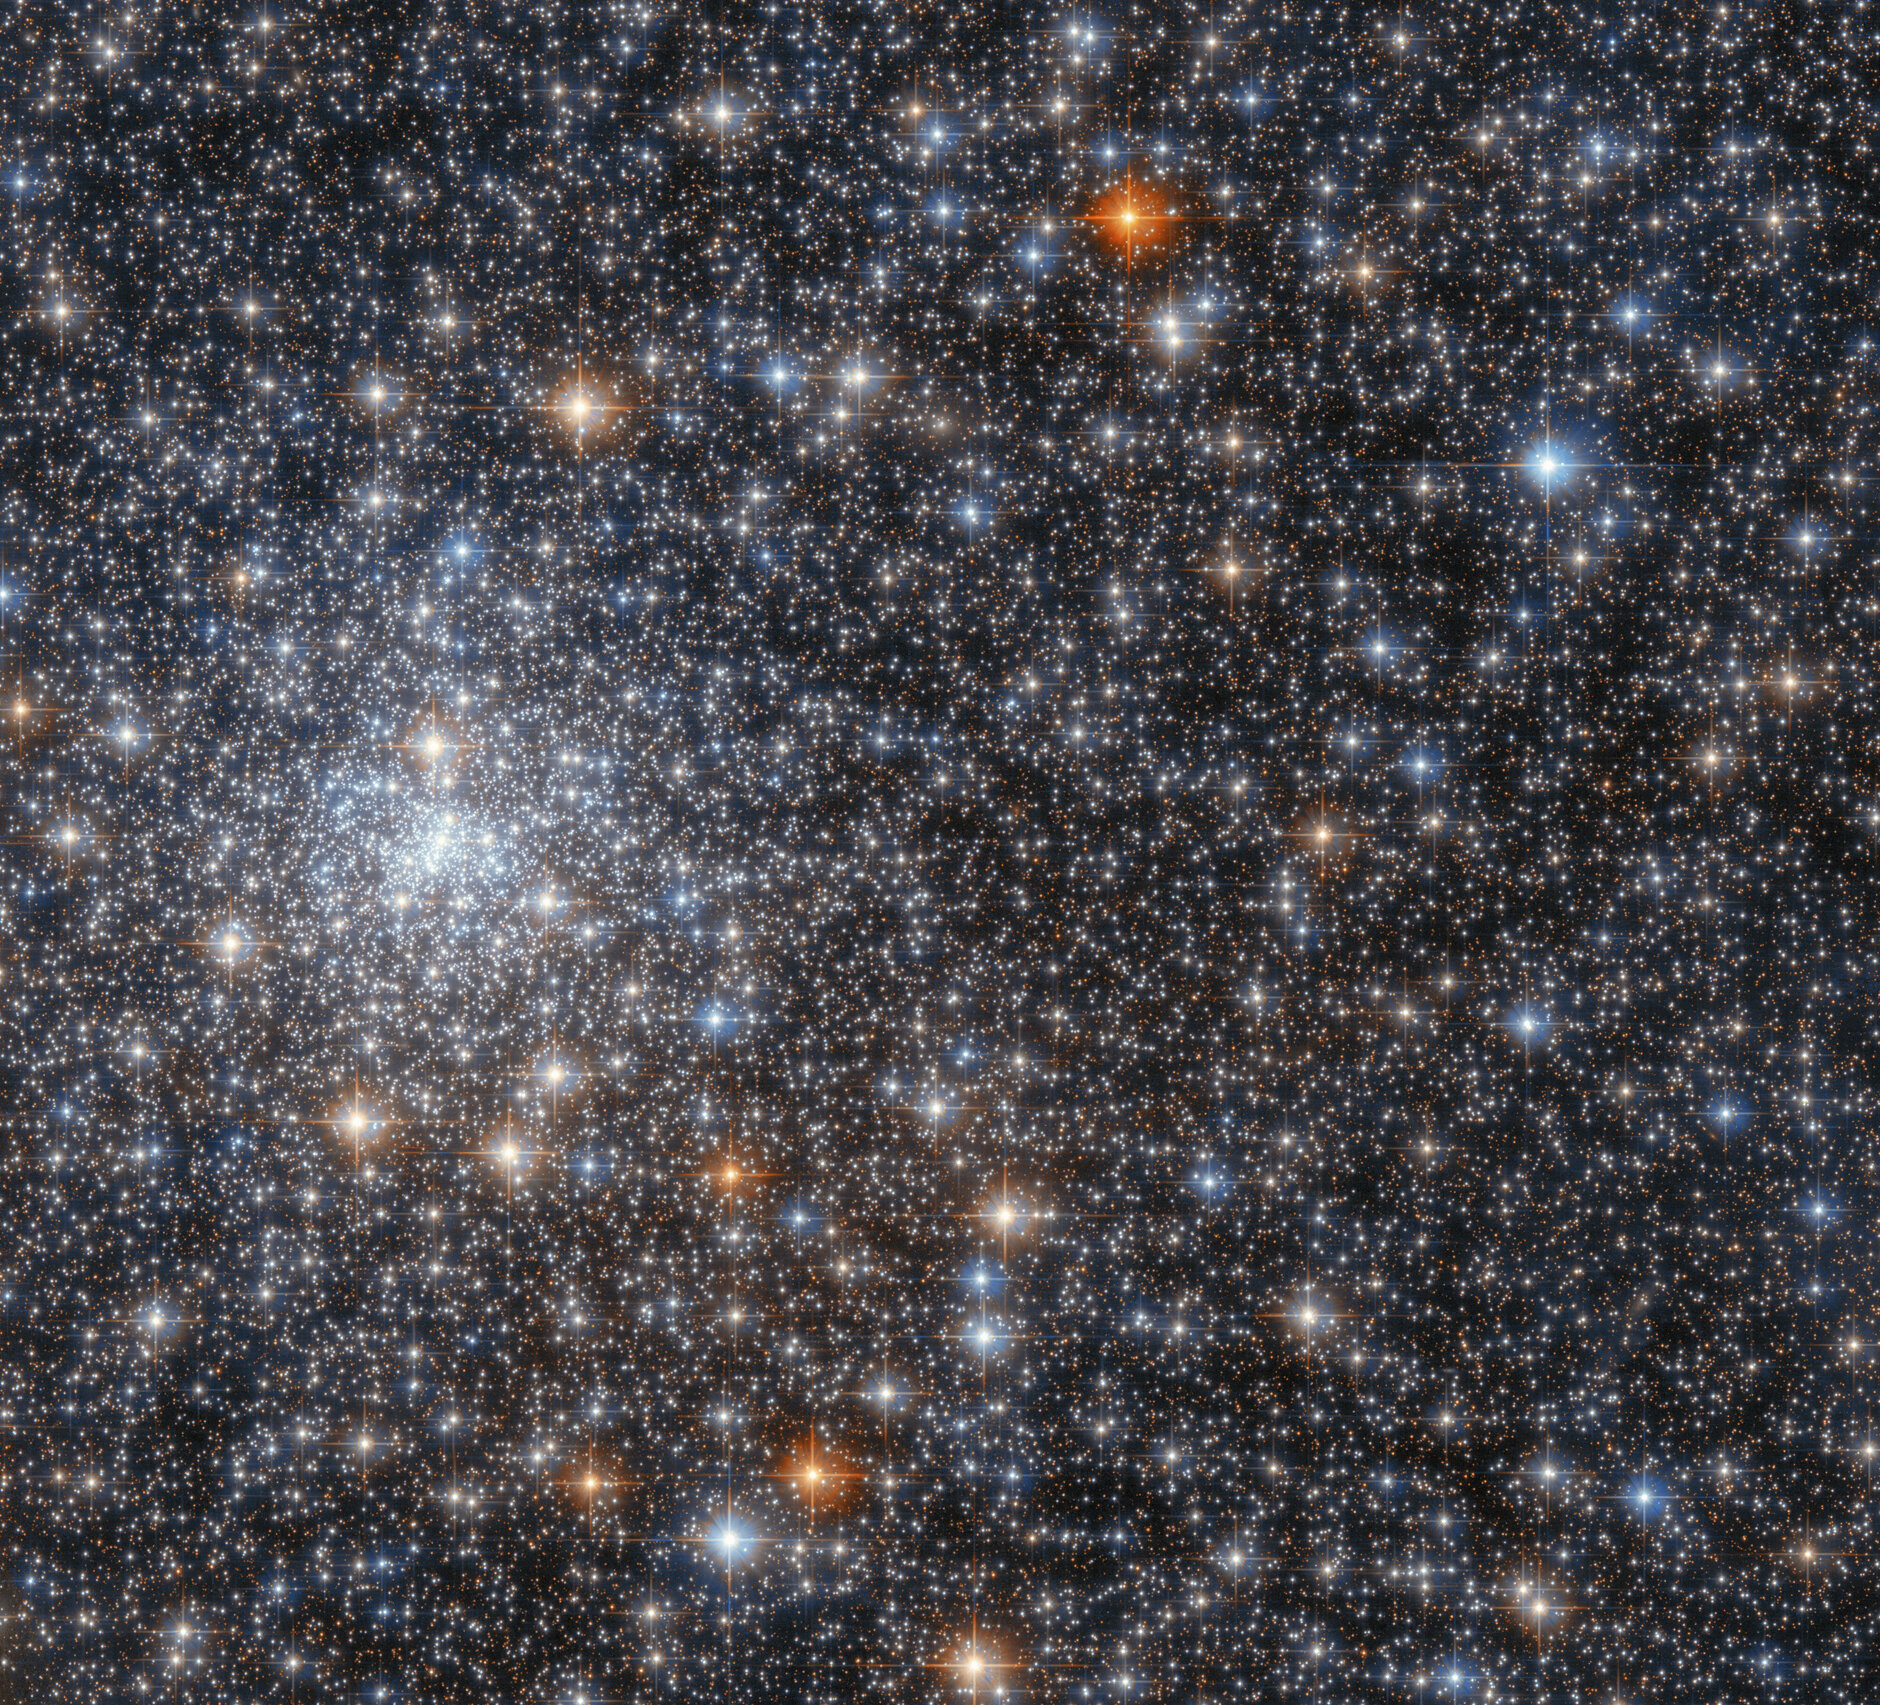 An Advanced Camera for Surveys on the Hubble Space Telescope captured this stunning cluster of stars, NGC 6558. Image Credit: ESA/Hubble & NASA, R. Cohen.